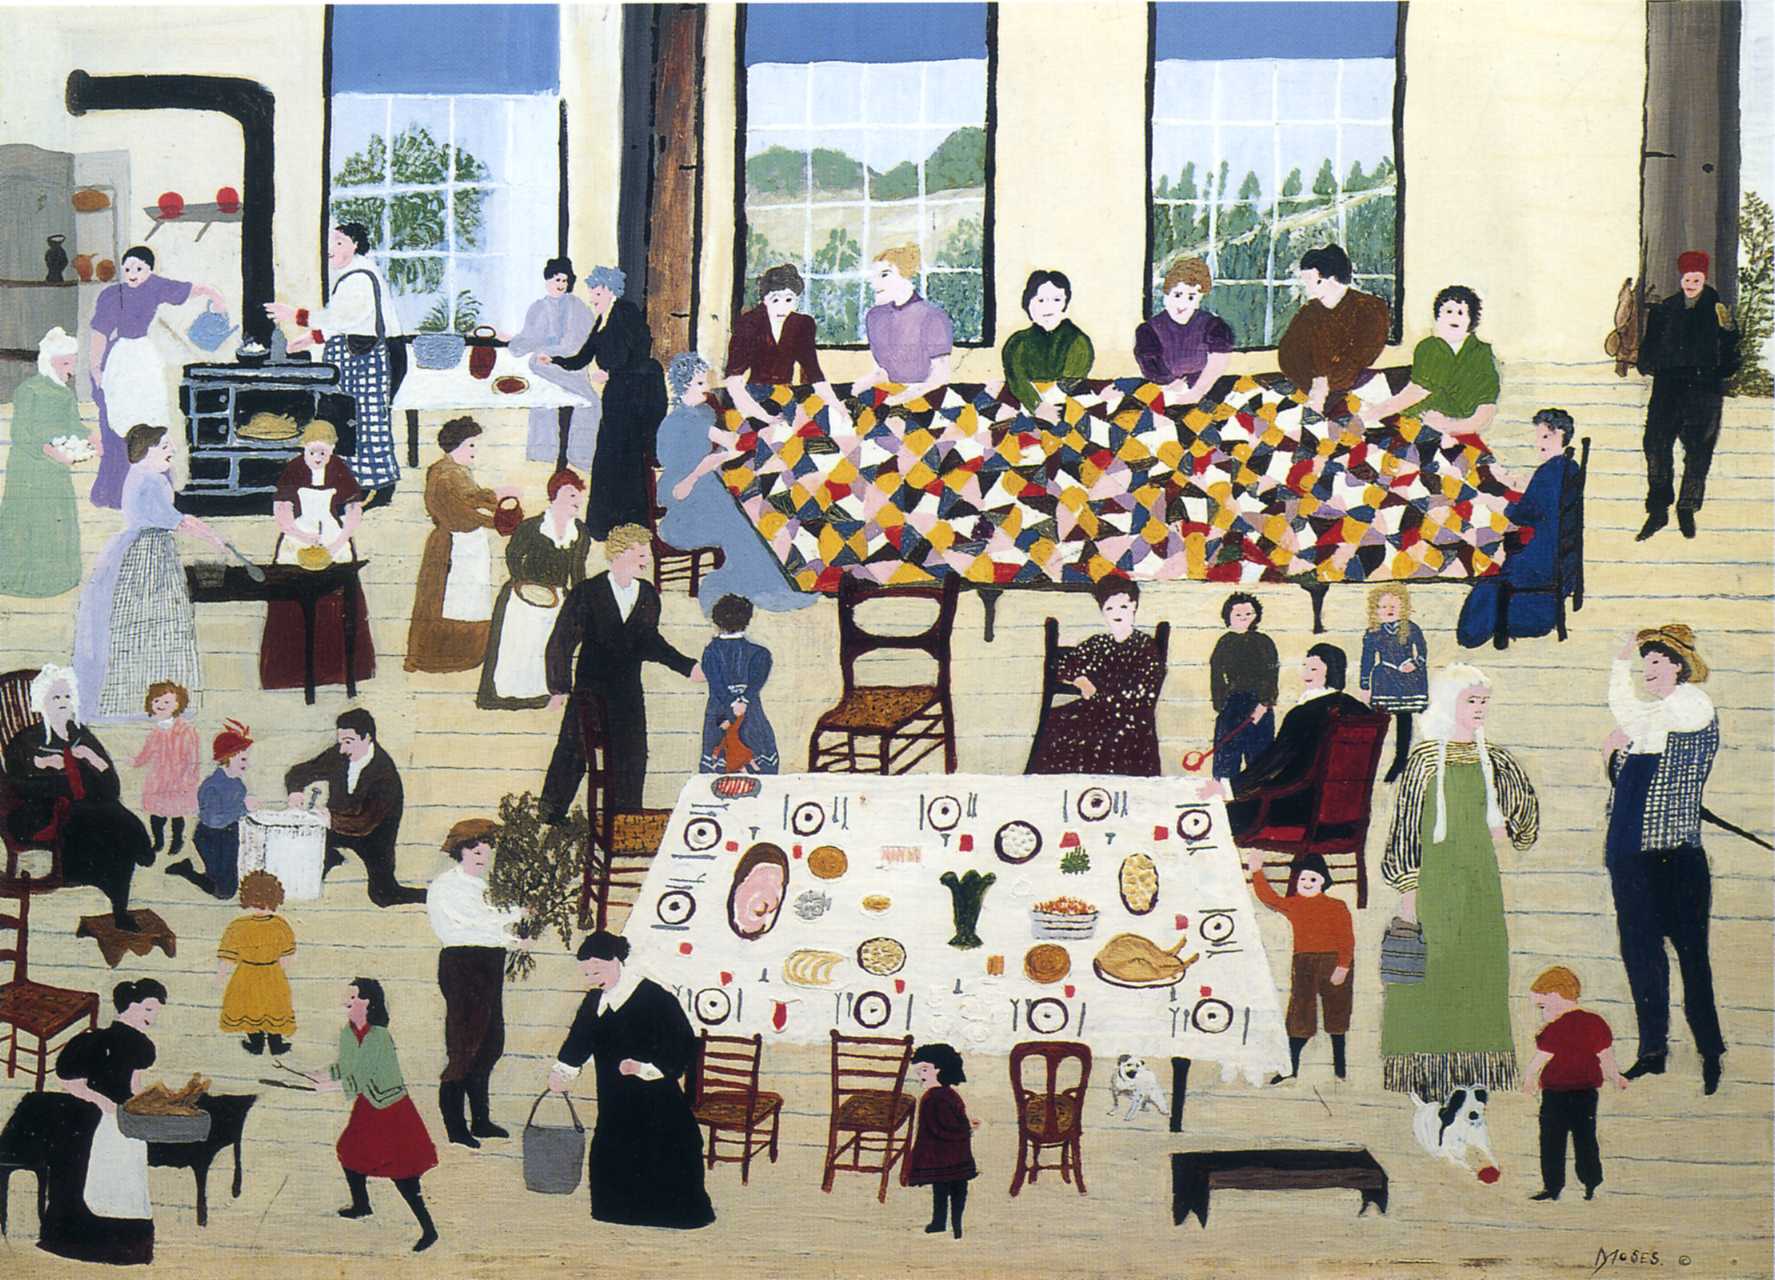 The Quilting Bee by Grandma Moses - 1940 - - private collection